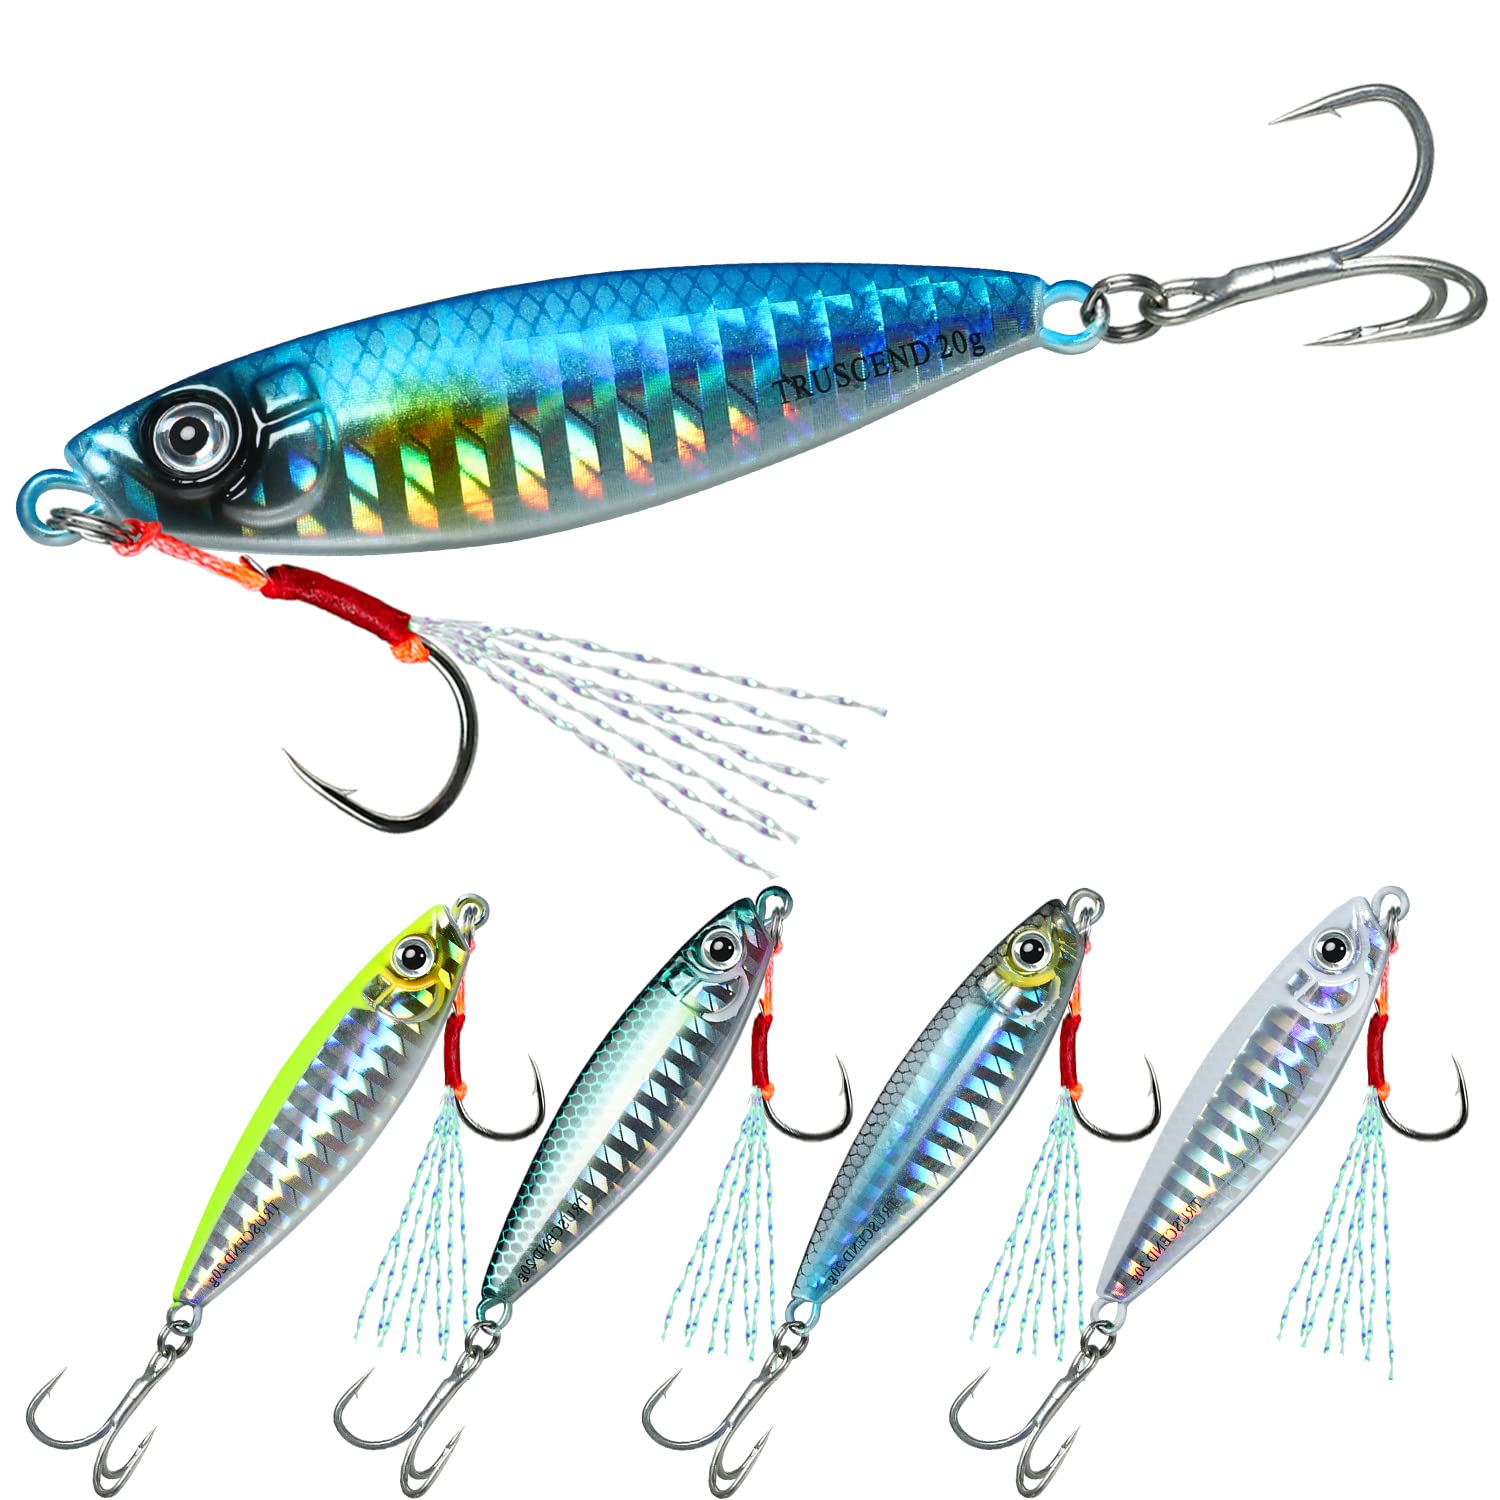 TRUSCEND Saltwater Jigs Fishing Lures 10g-160g with Flat BKK Hooks